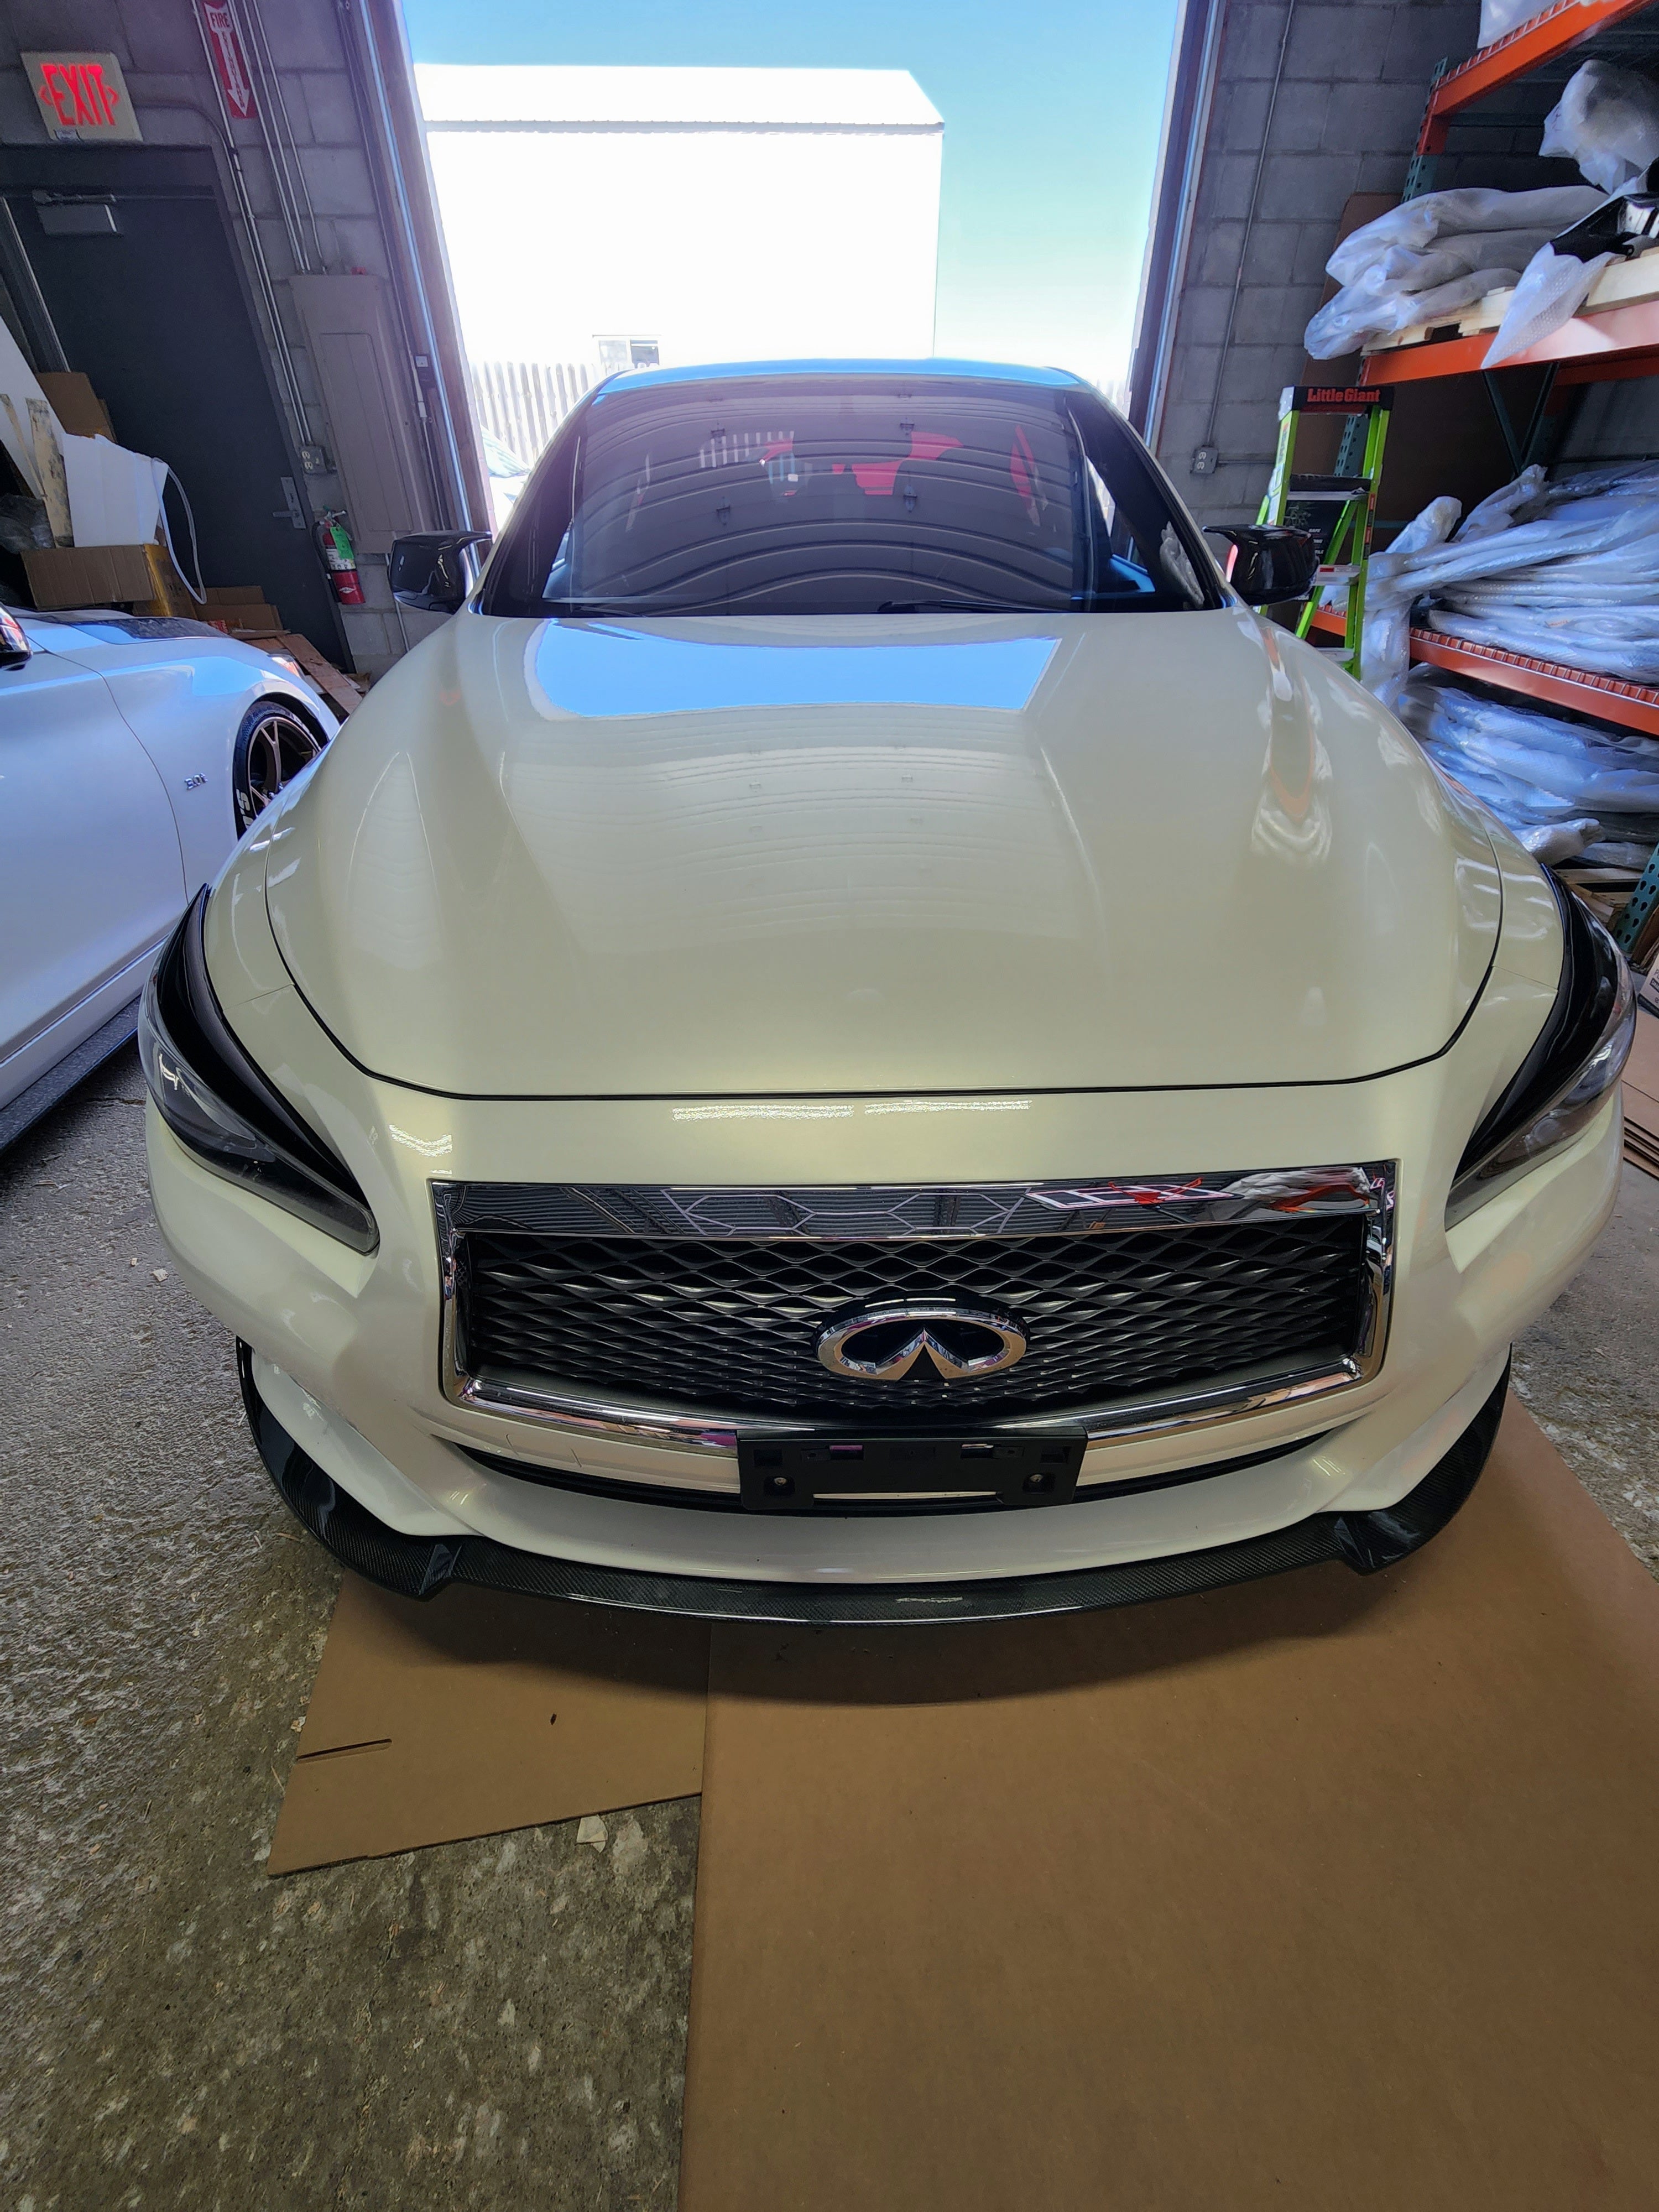 "Perspective view of Q50 with JCF Splitter, underlining the low-profile and race-inspired look.